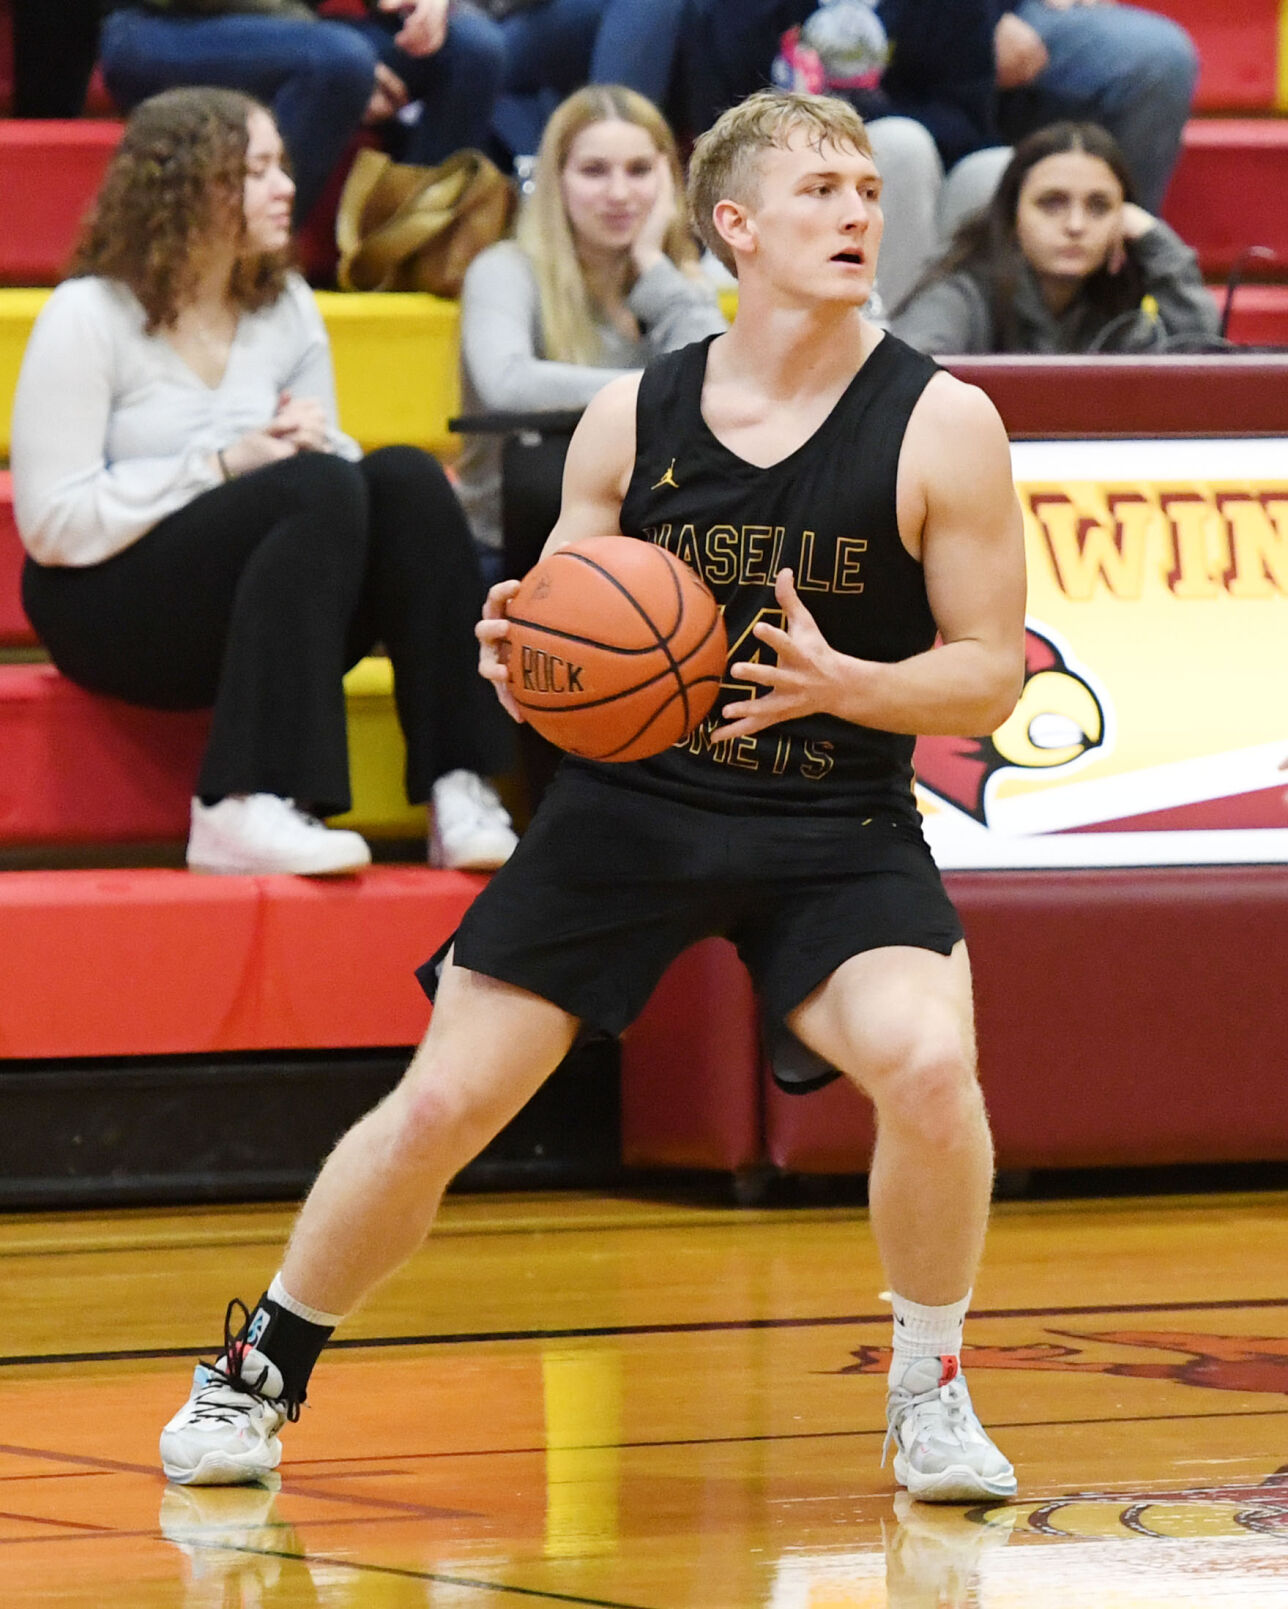 1B/2B High School Boys Basketball Roundup Jacob Lindstrom leads Naselle comeback at Winlock picture image